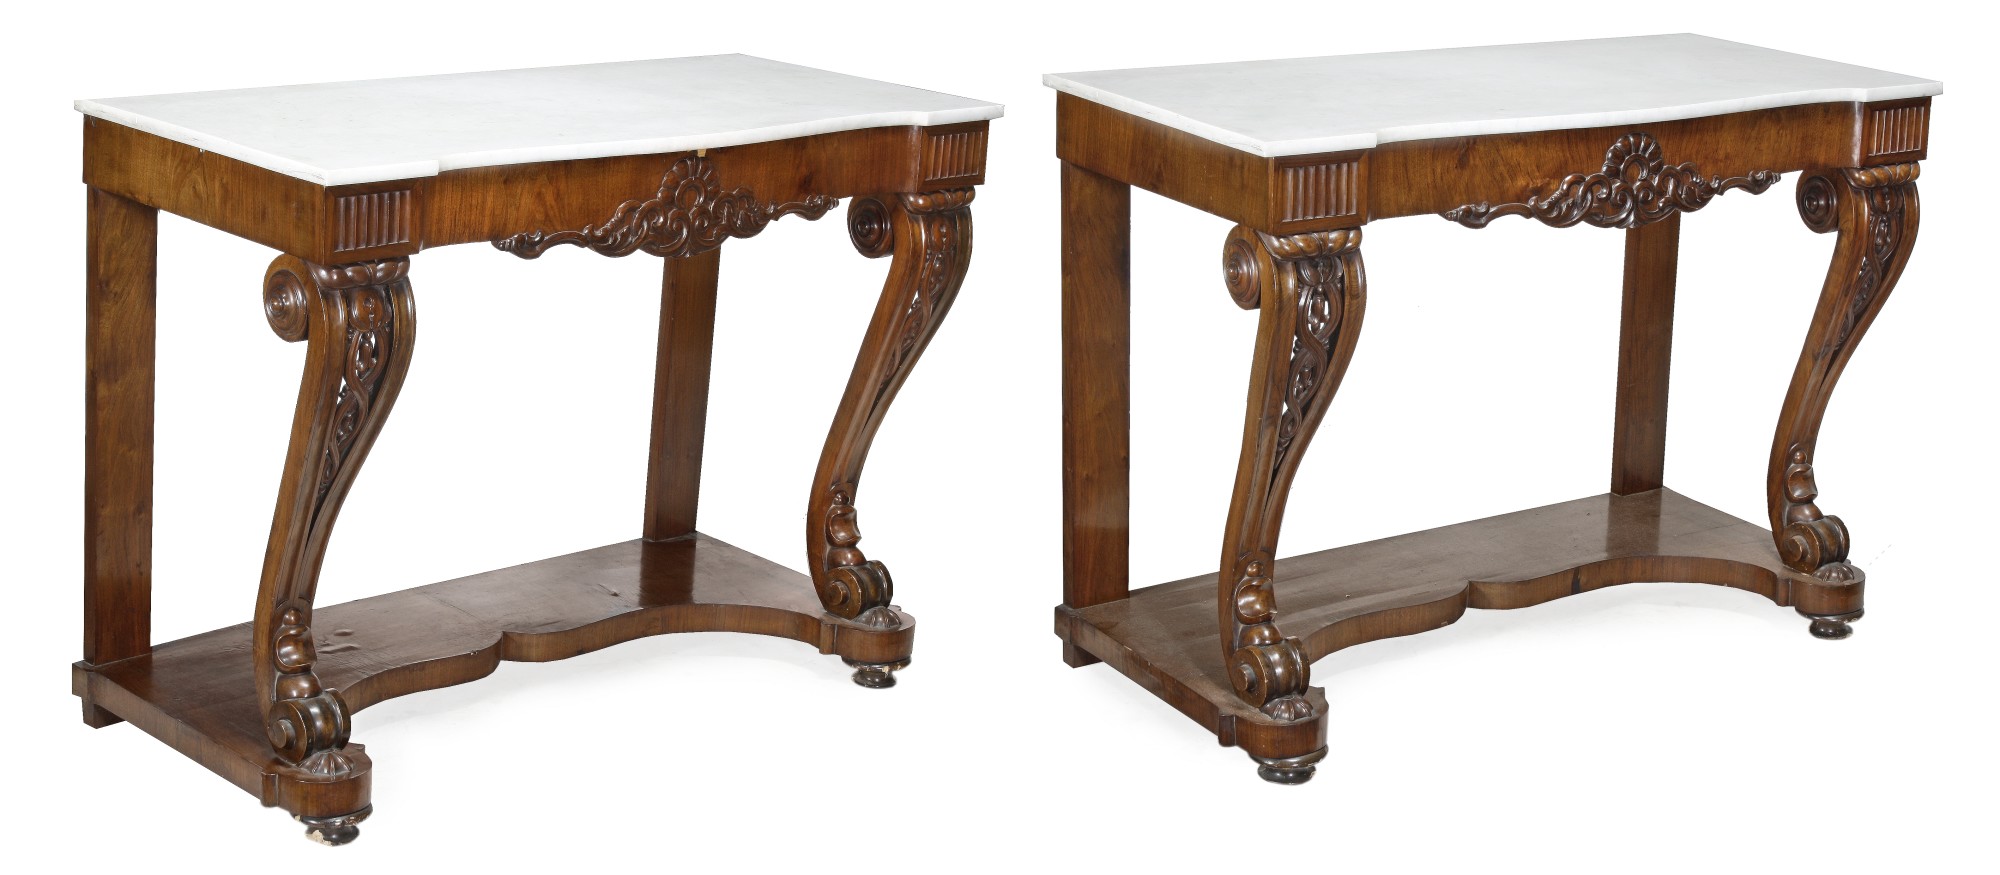 A pair of French walnut and carrara marble mounted console tables, circa 1850, each serpentine